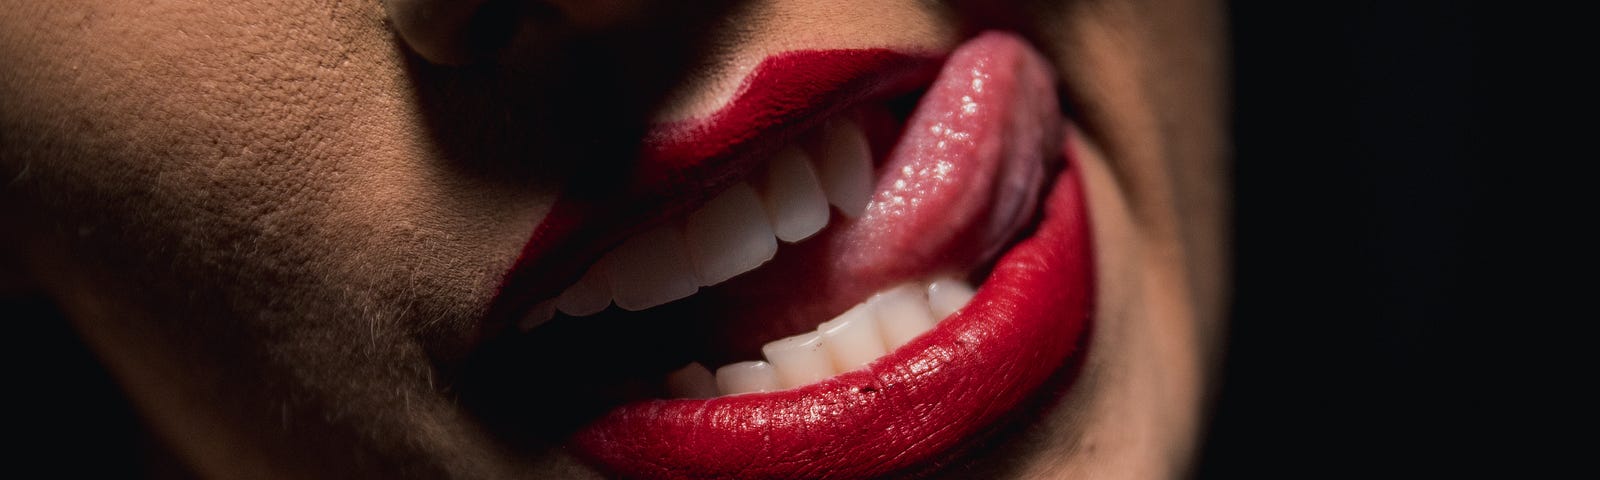 Partial image of the face of woman, red lips and her tongue sticking out the left corner of her mouth. Part of her nose is visible.